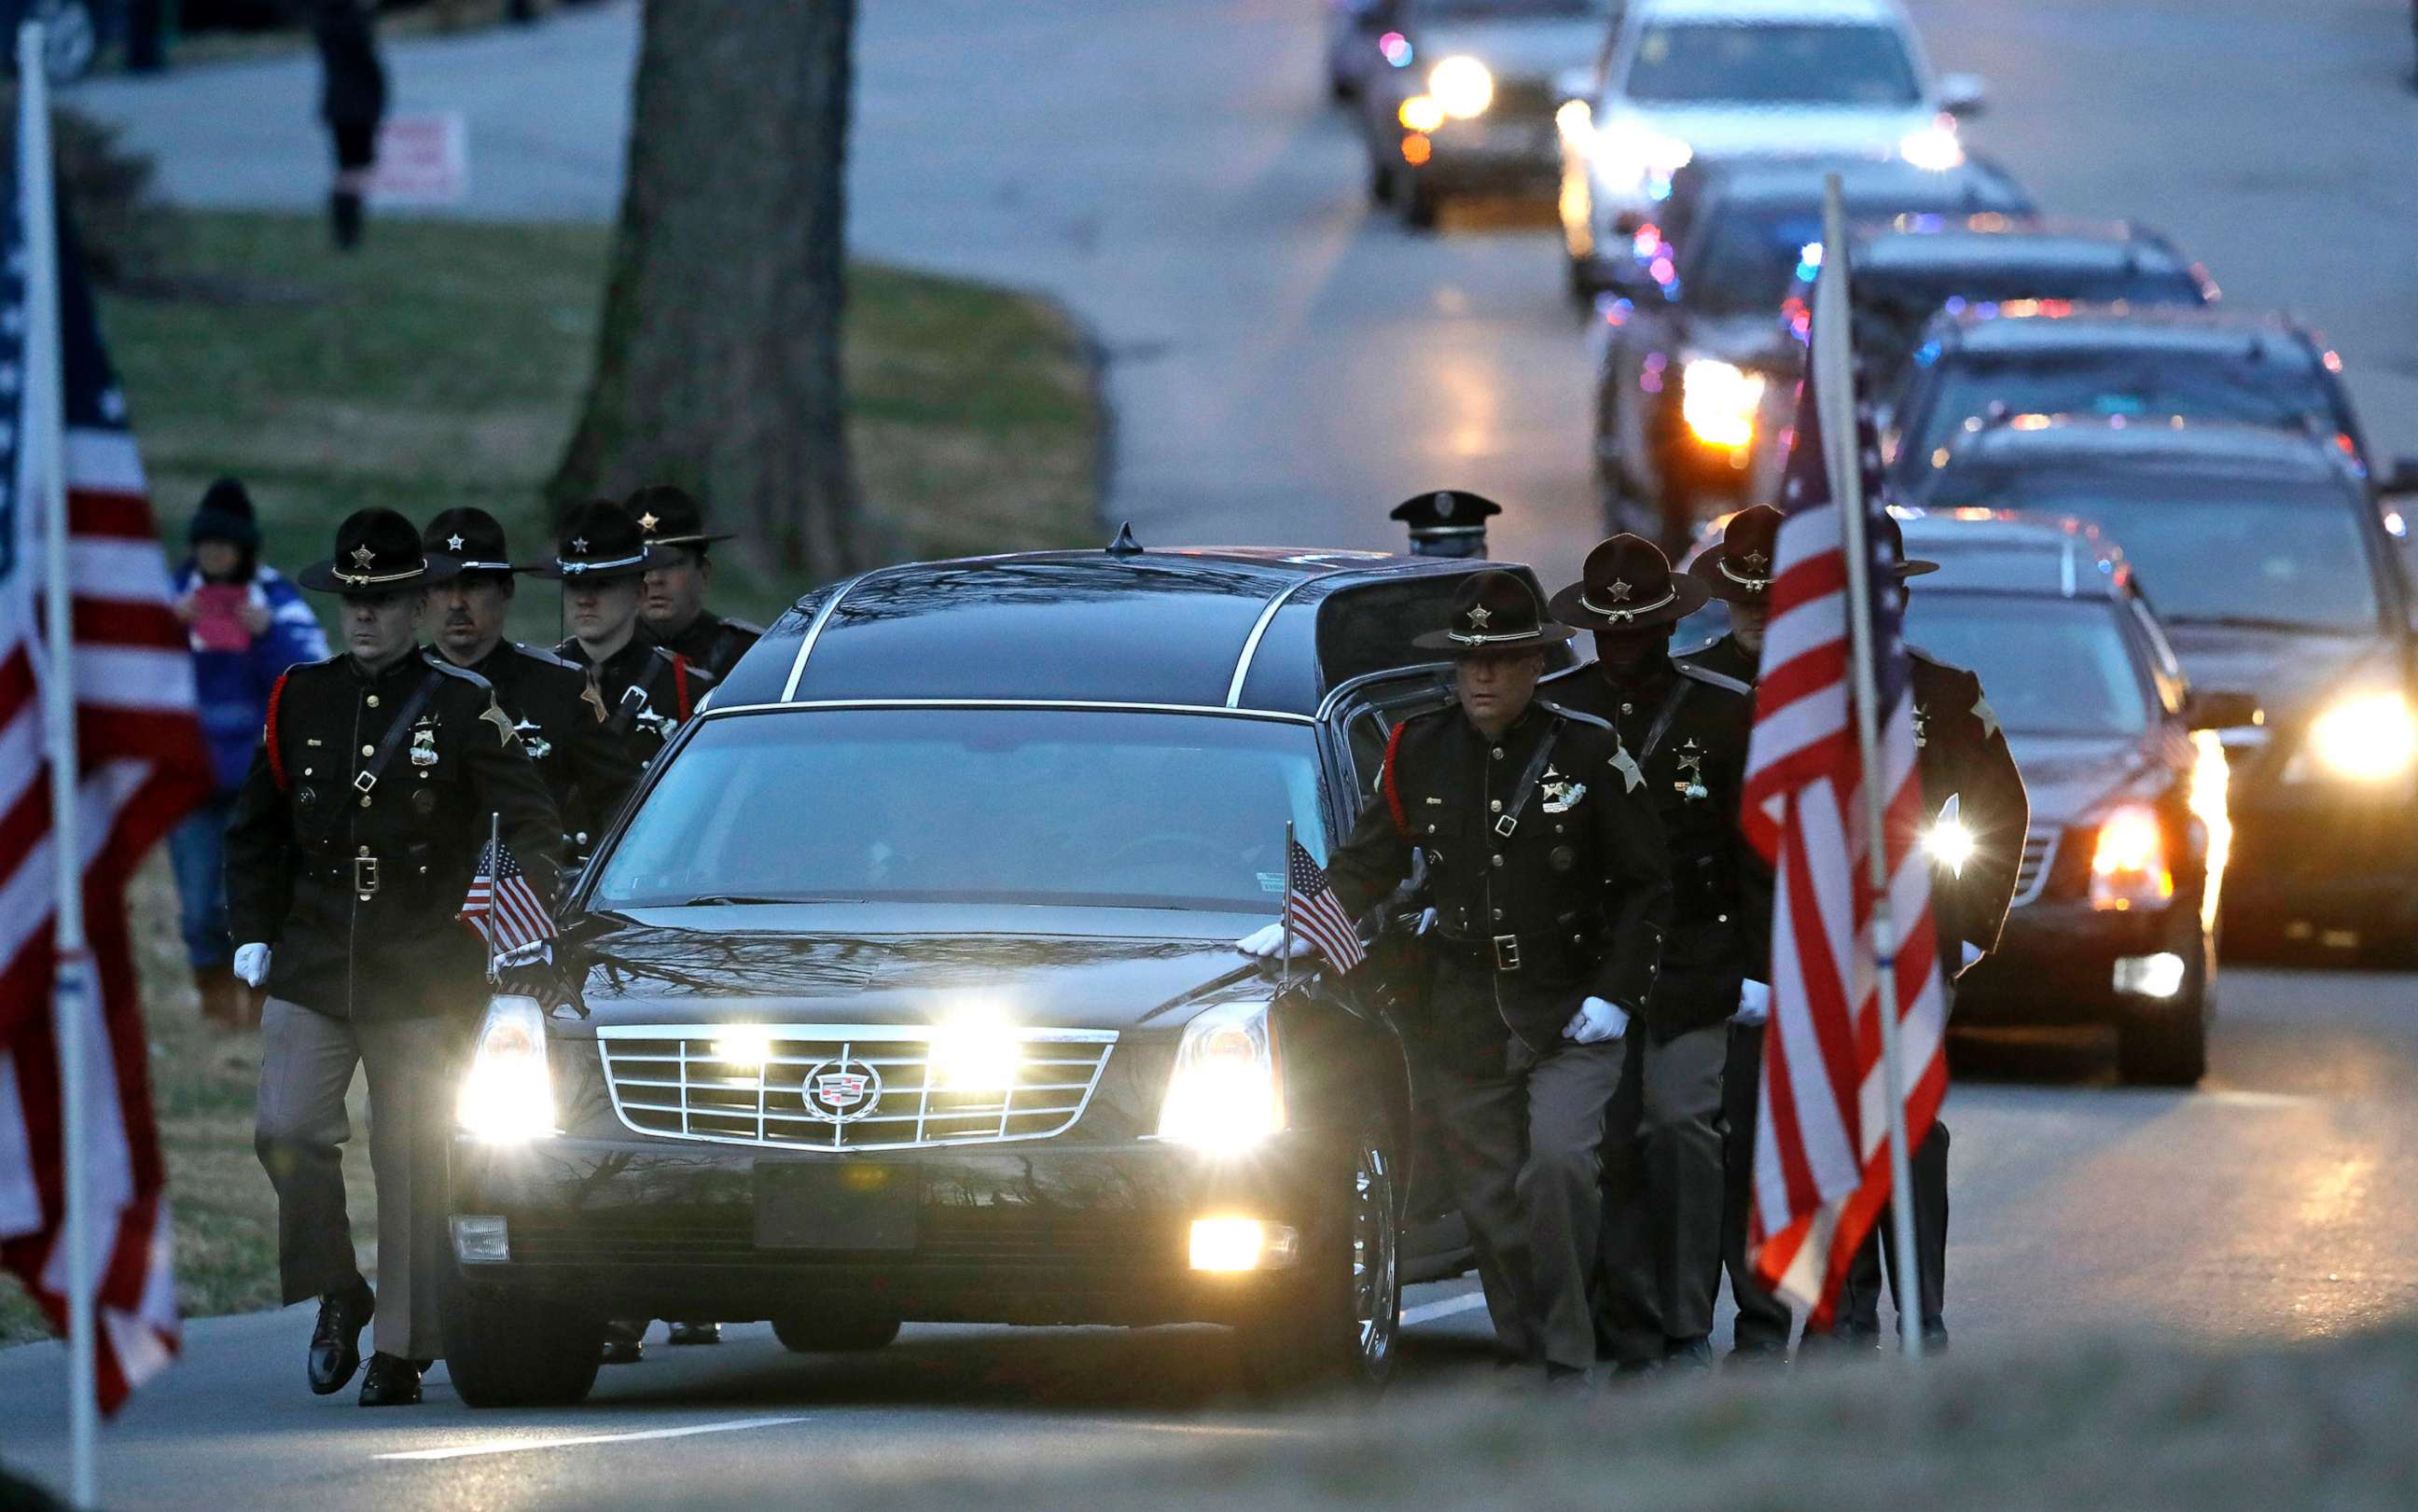 PHOTO: The honor guard walks along the hearse carrying the casket of Boone County Sheriff's Deputy Jacob Pickett, March 9, 2018, in Indianapolis. Pickett was fatally shot March 2, 2018, while chasing a man fleeing from police.